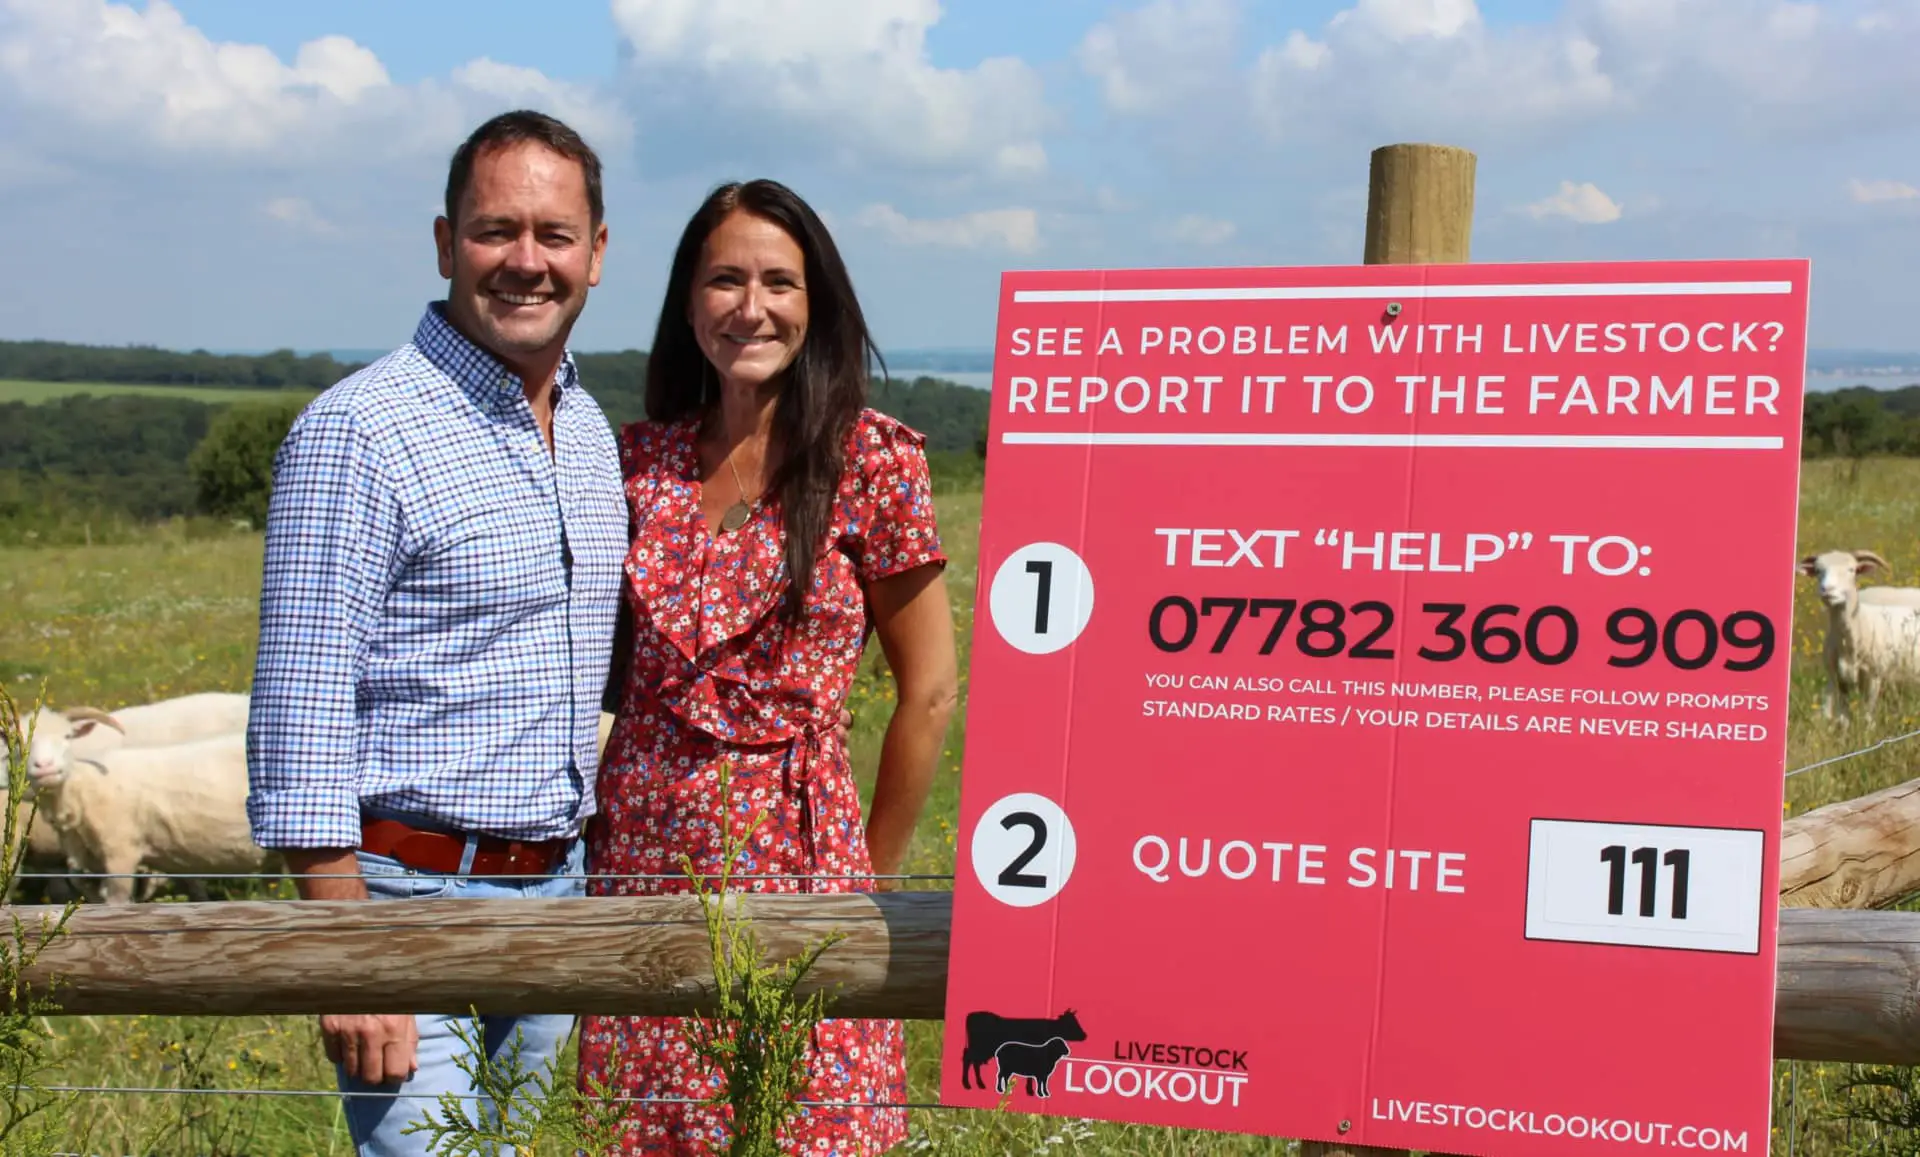 Tim and Danielle Rogers with the Livestock lookout sign